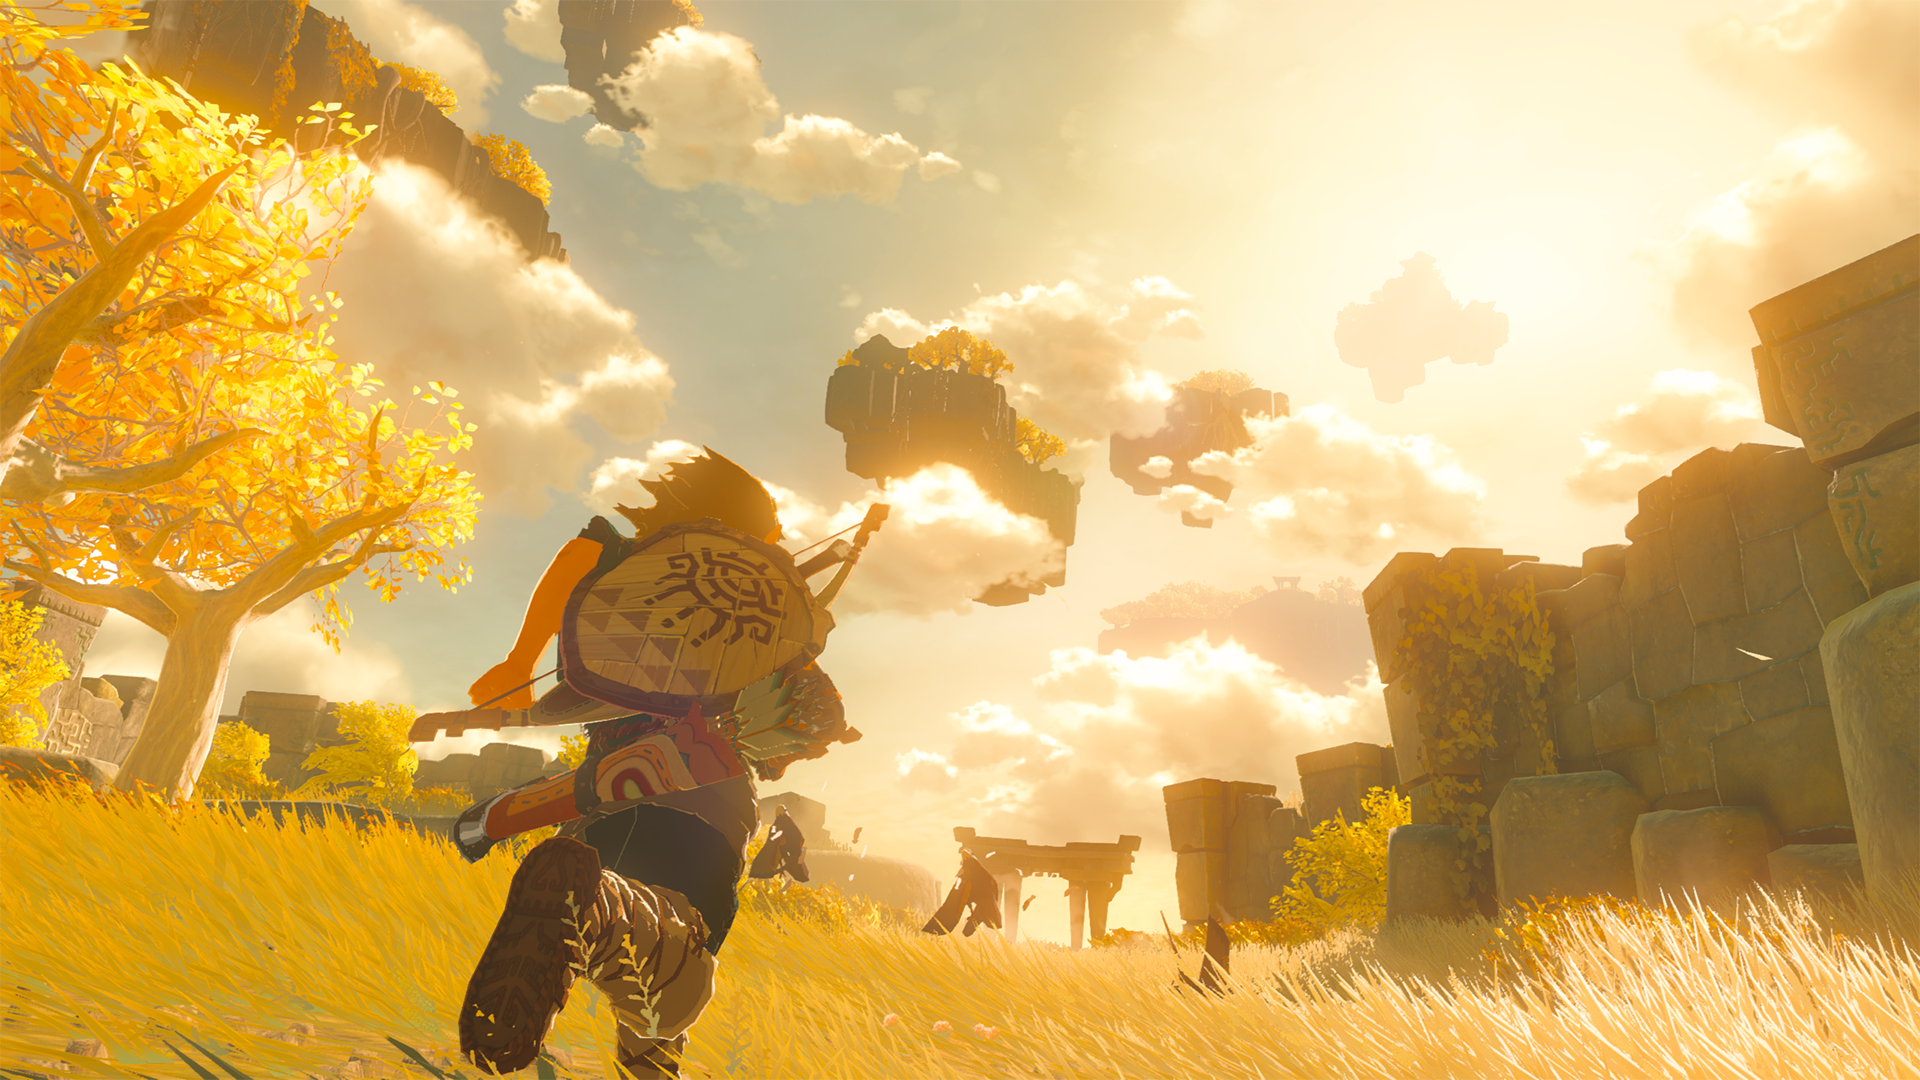 Video game screenshot of a young man with a shield on his back running through tall grass below a golden sky